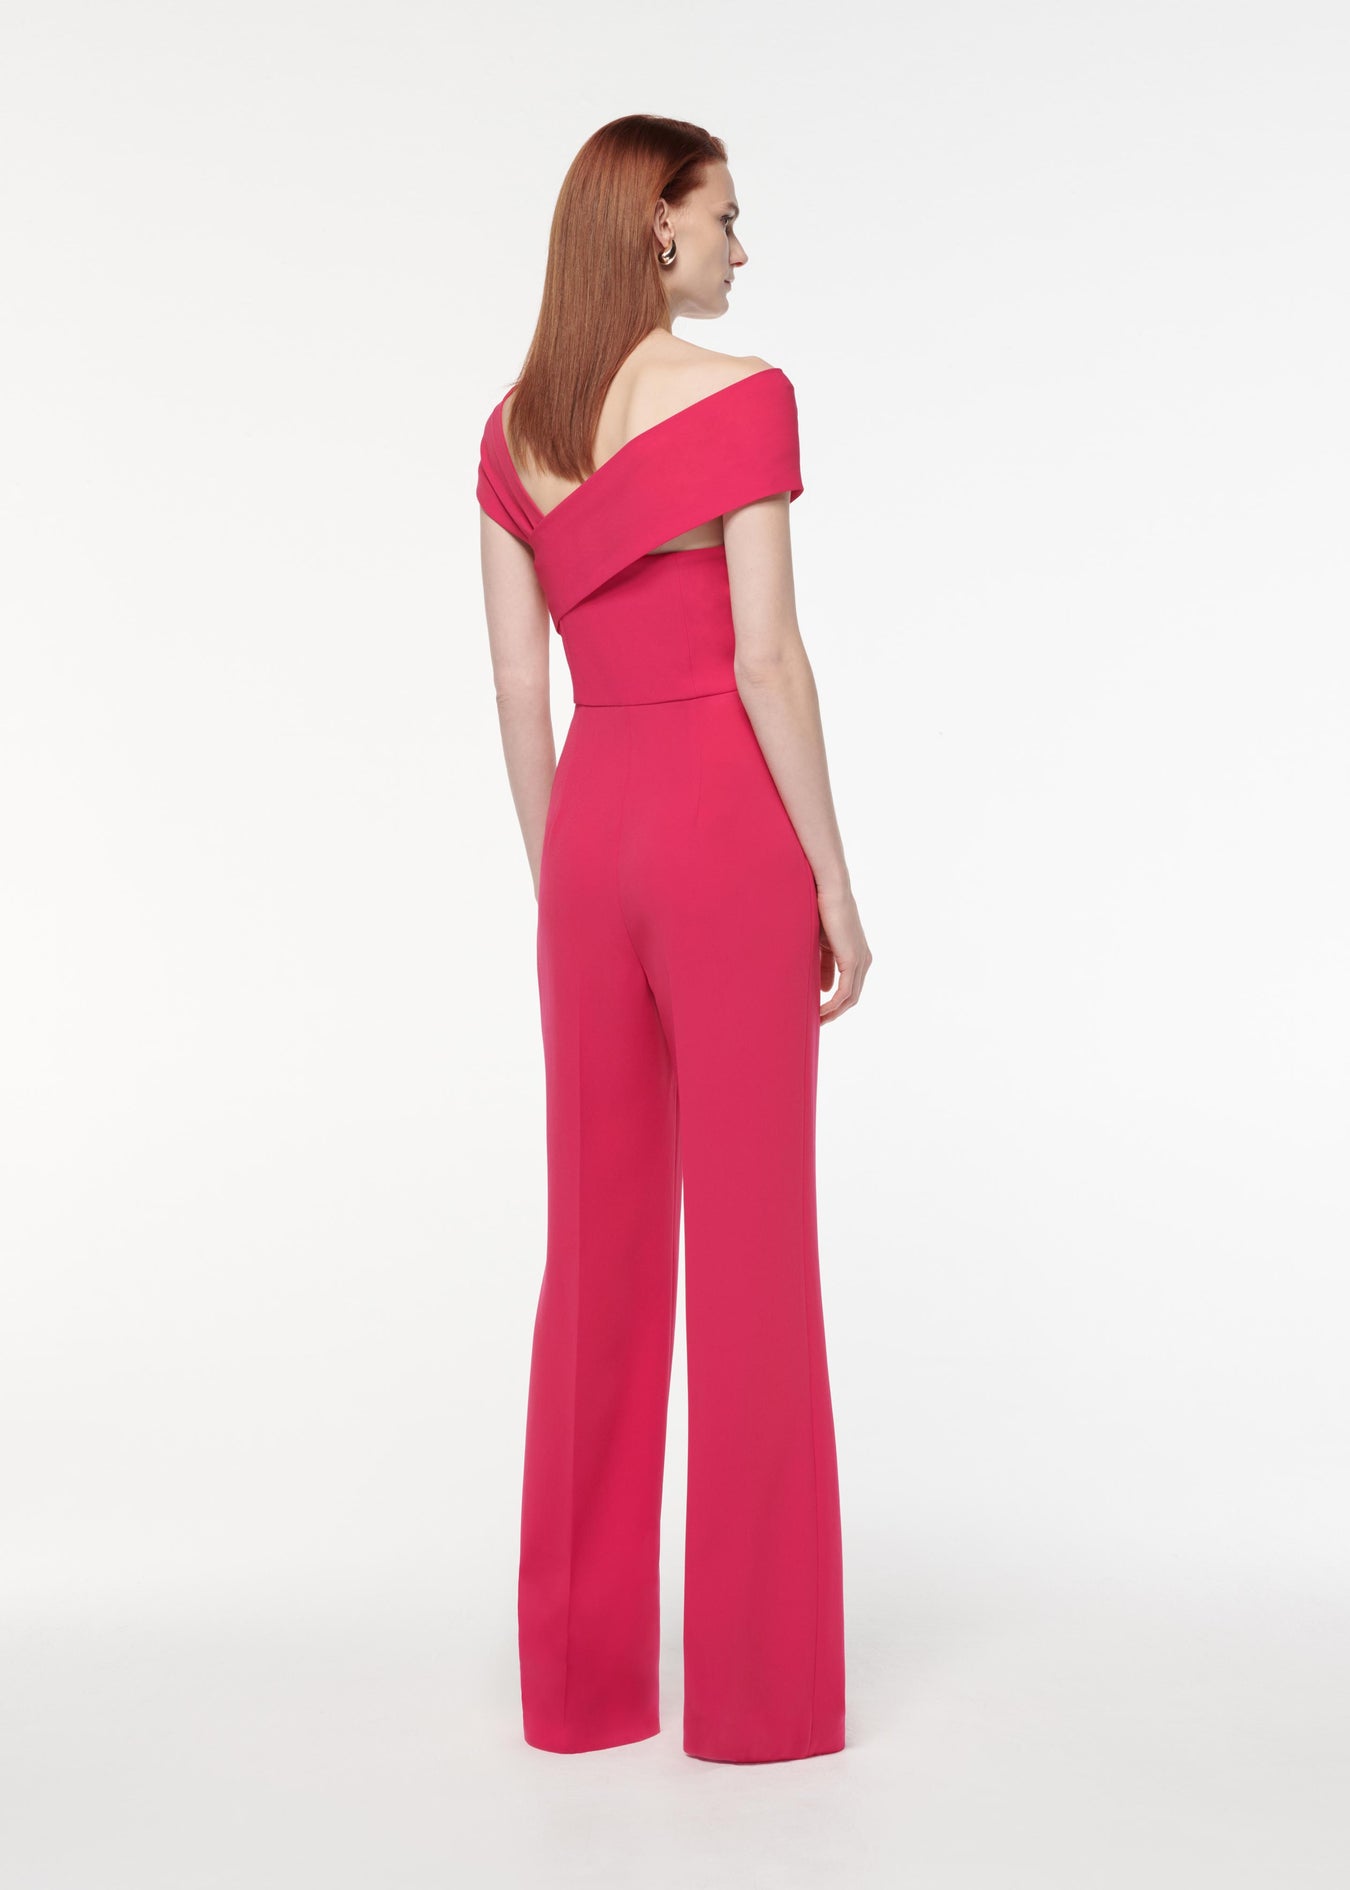 A photograph of a woman wearing a Asymmetric Light Cady Jumpsuit in Pink